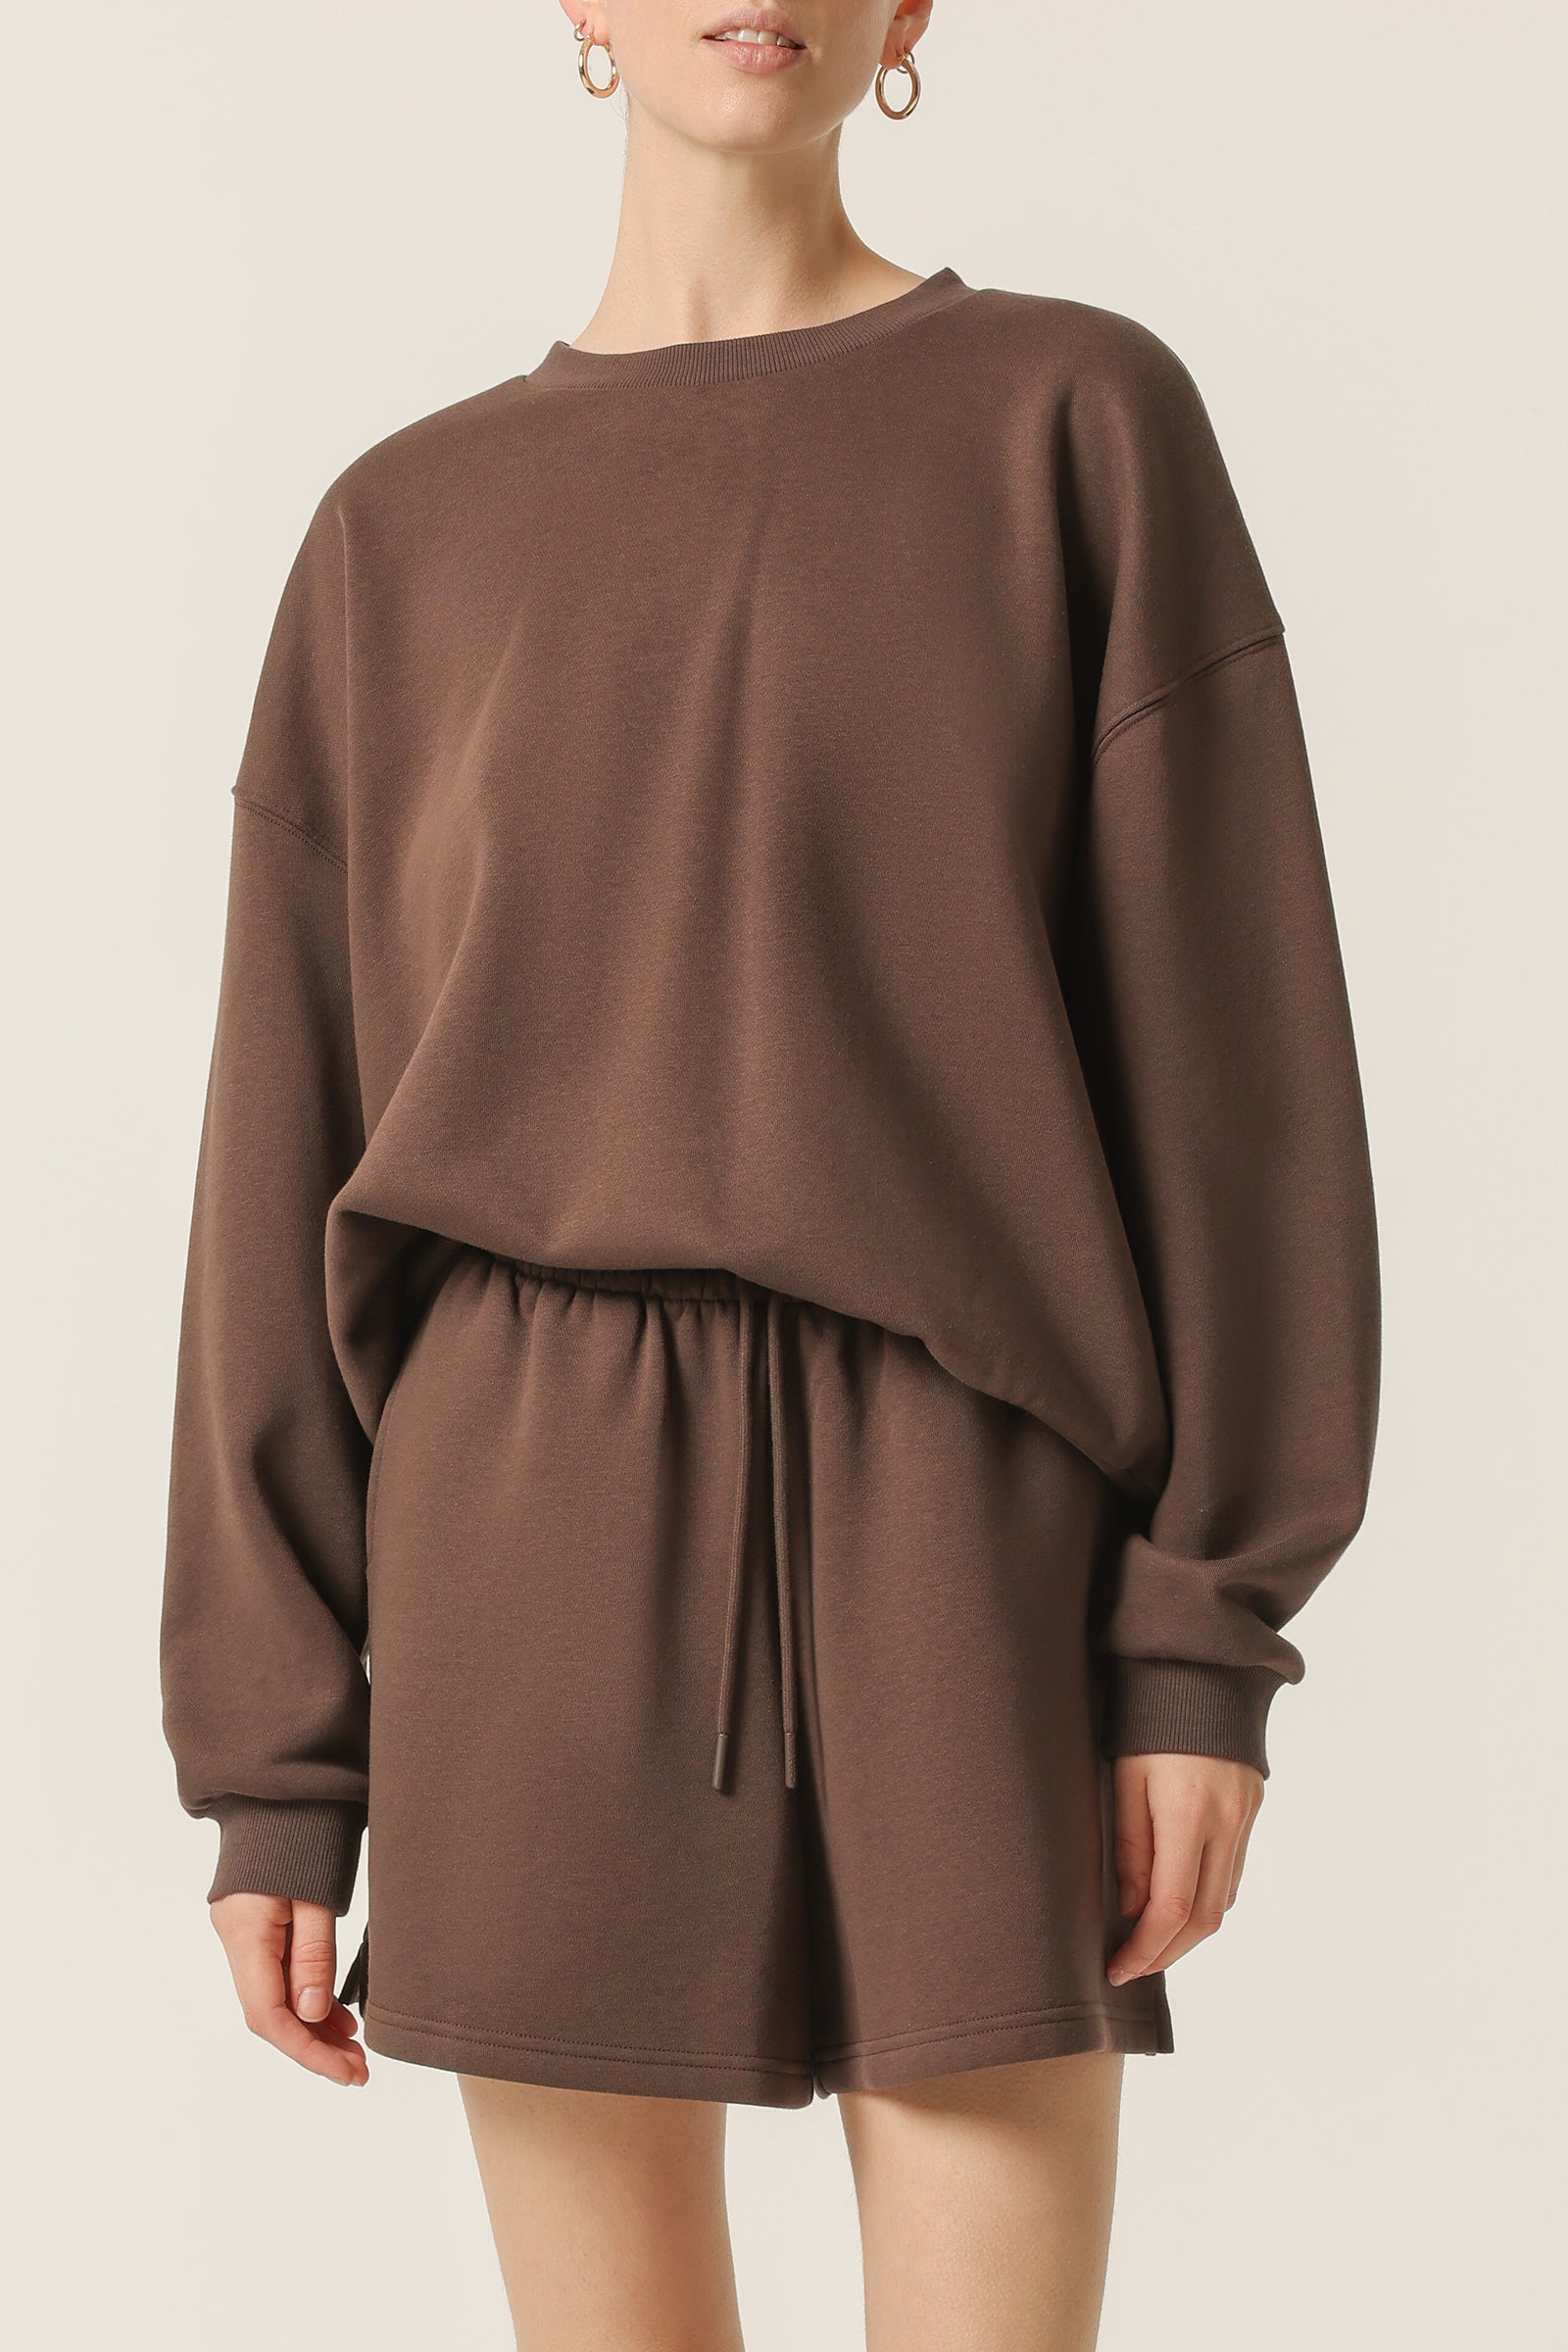 Nude Lucy Carter Curated Sweat In a Deep Brown Bark Colour 